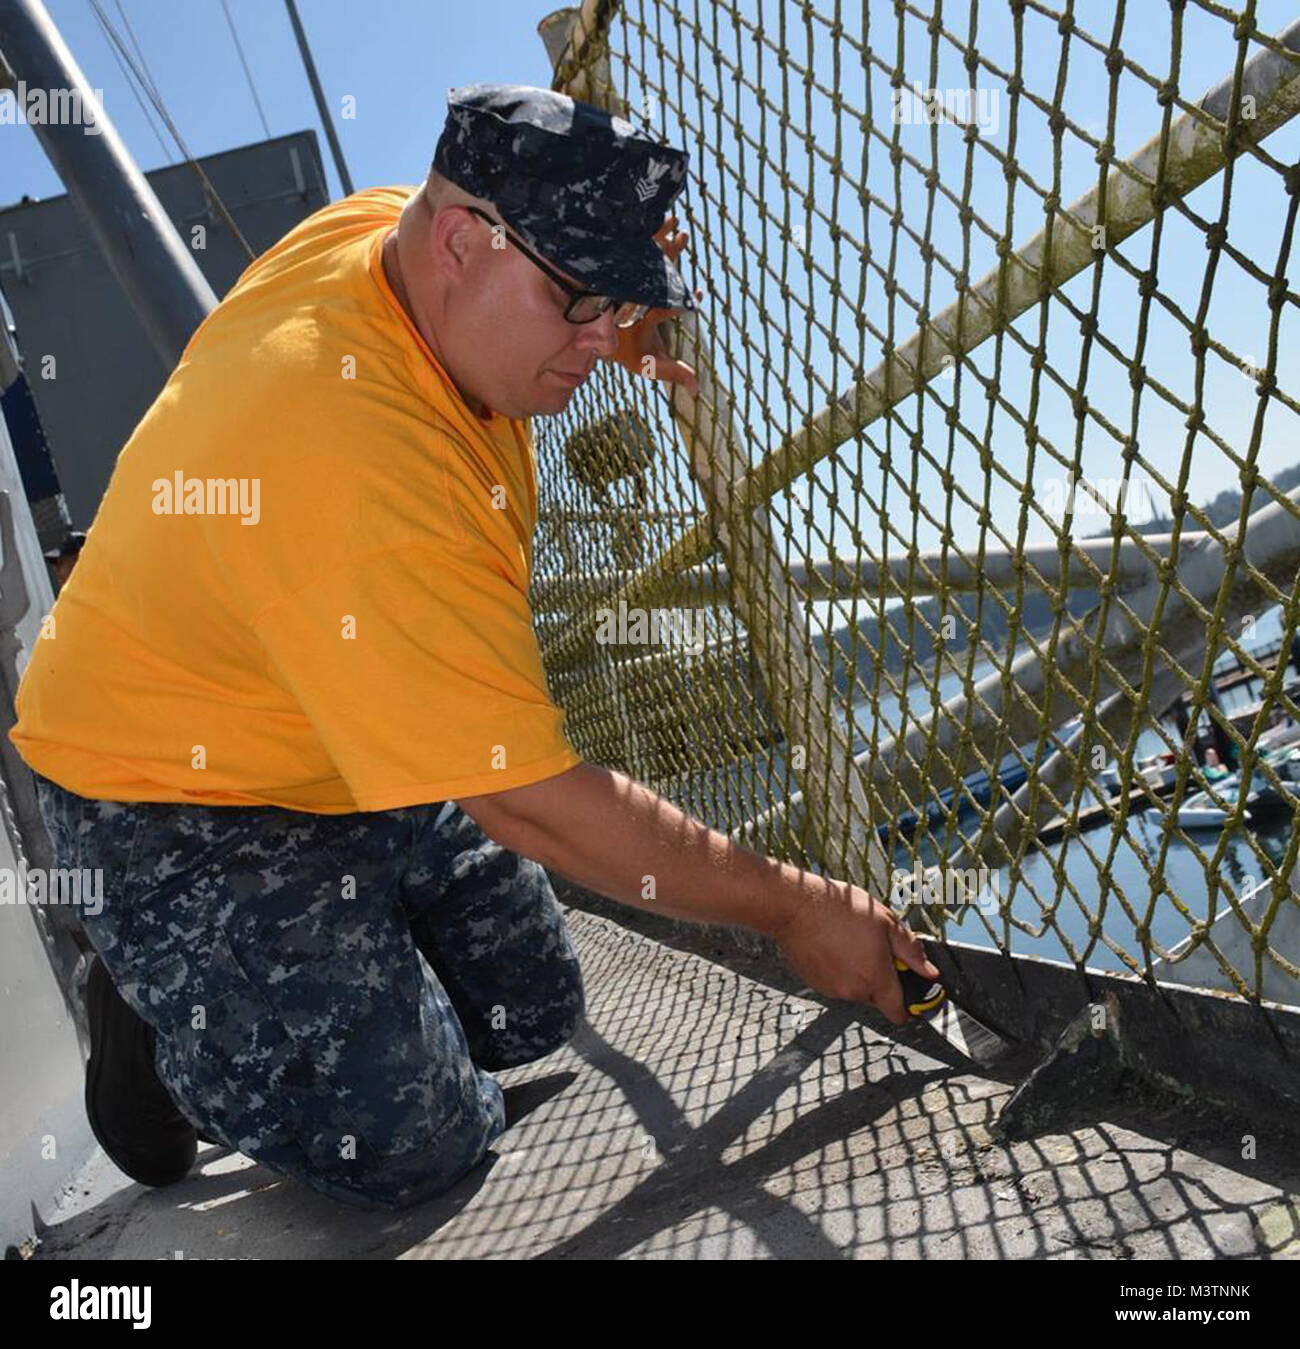 160817-N-SP496-045 BREMERTON, Wash. (Aug. 17, 2016) - Yeomen Chief select Bradley Daly of the USS Alabama Blue crew is chipping old paint for the USS Turner Joy repainting. USS Turner Joy Chief Petty Officer Legacy Academy gives recent chief selectees the privilege of attending as Class 008. Through the week they will reside aboard the vessel and participate in a variety of activities, providing a continuous lesson in heritage and teamwork. (U.S. Navy photo by Airman Jane Wood) 160817-N-SP496-045 by Naval Base Kitsap (NBK) Stock Photo